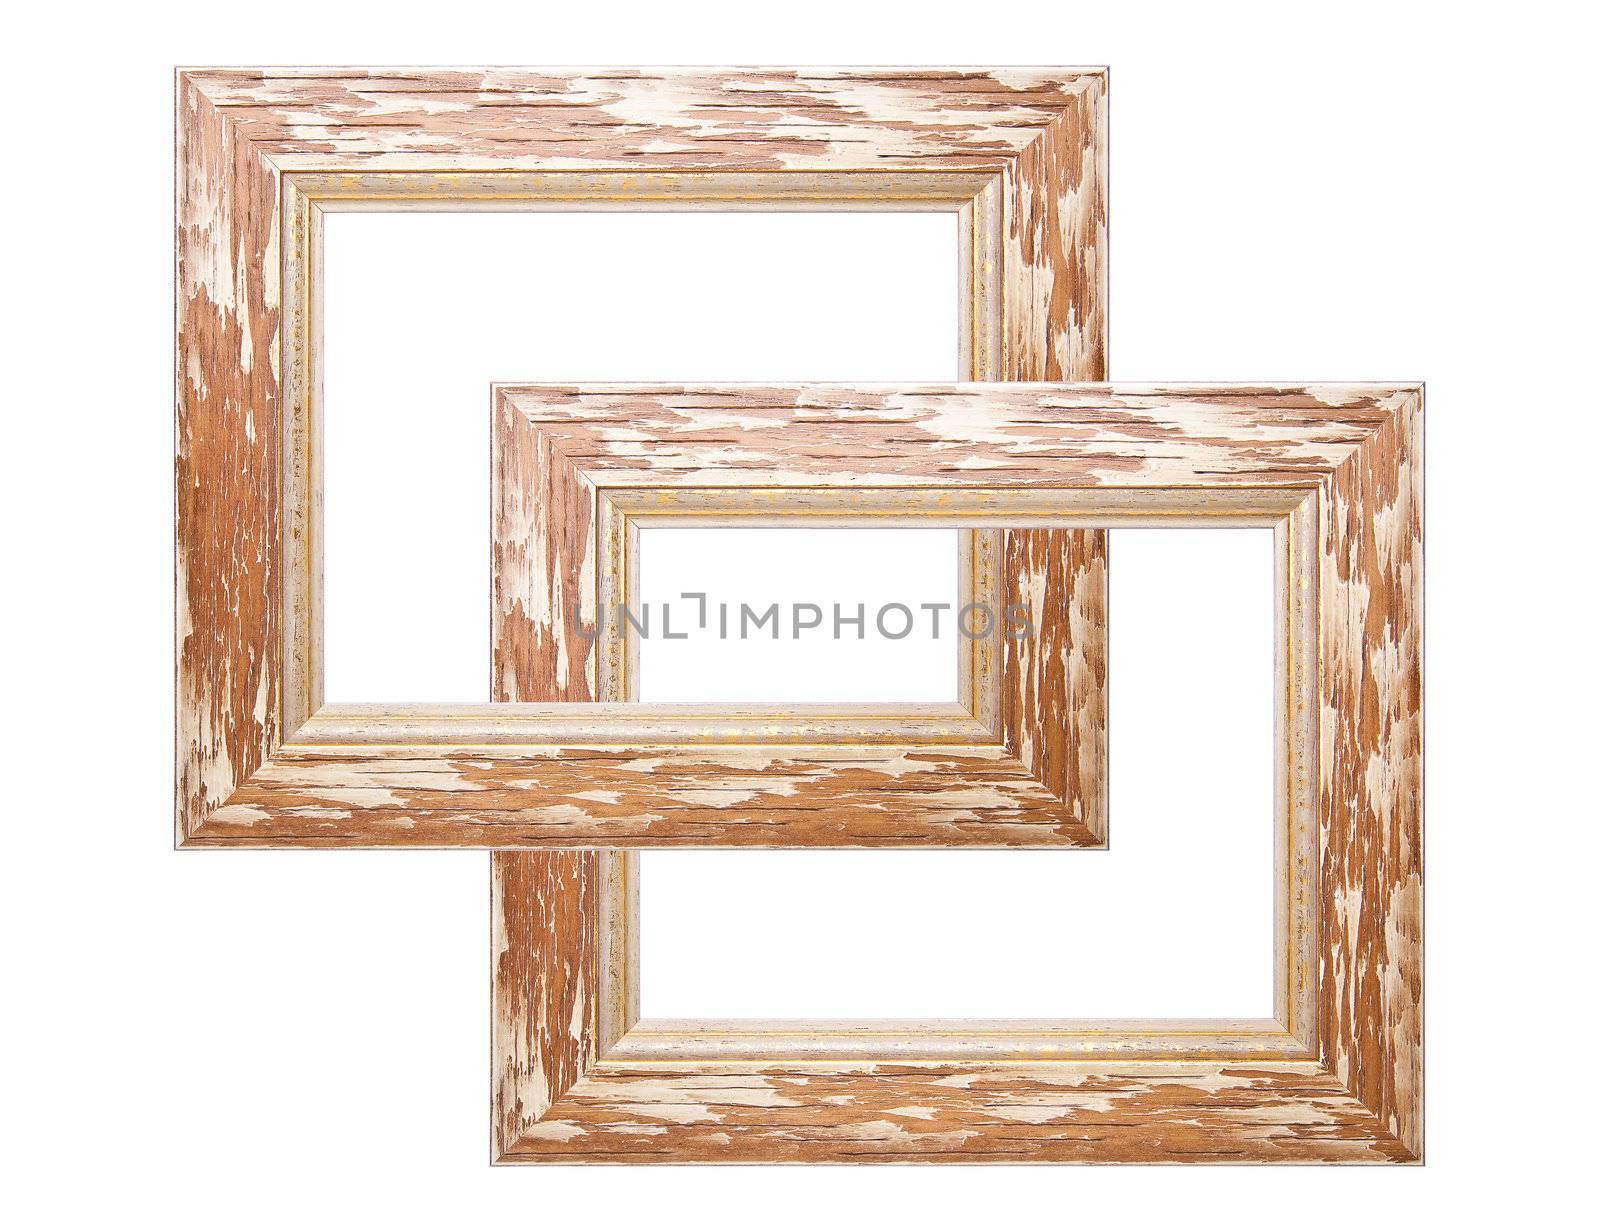 Optical Ilustion In Two Picture Frame by adamr